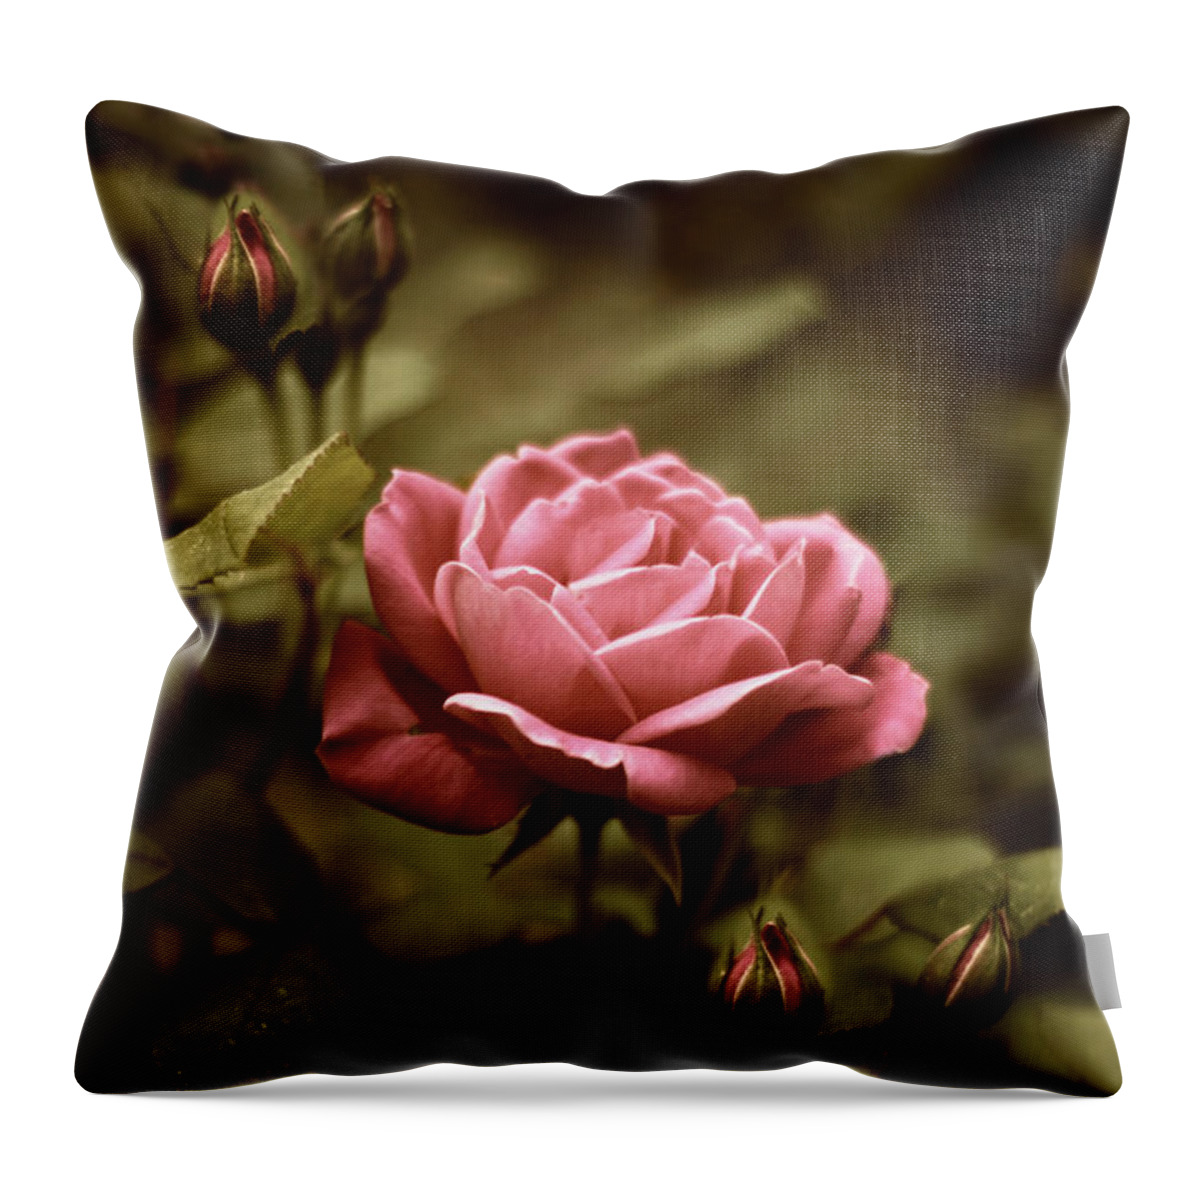 Flowers Throw Pillow featuring the photograph Twilight Rose by Jessica Jenney